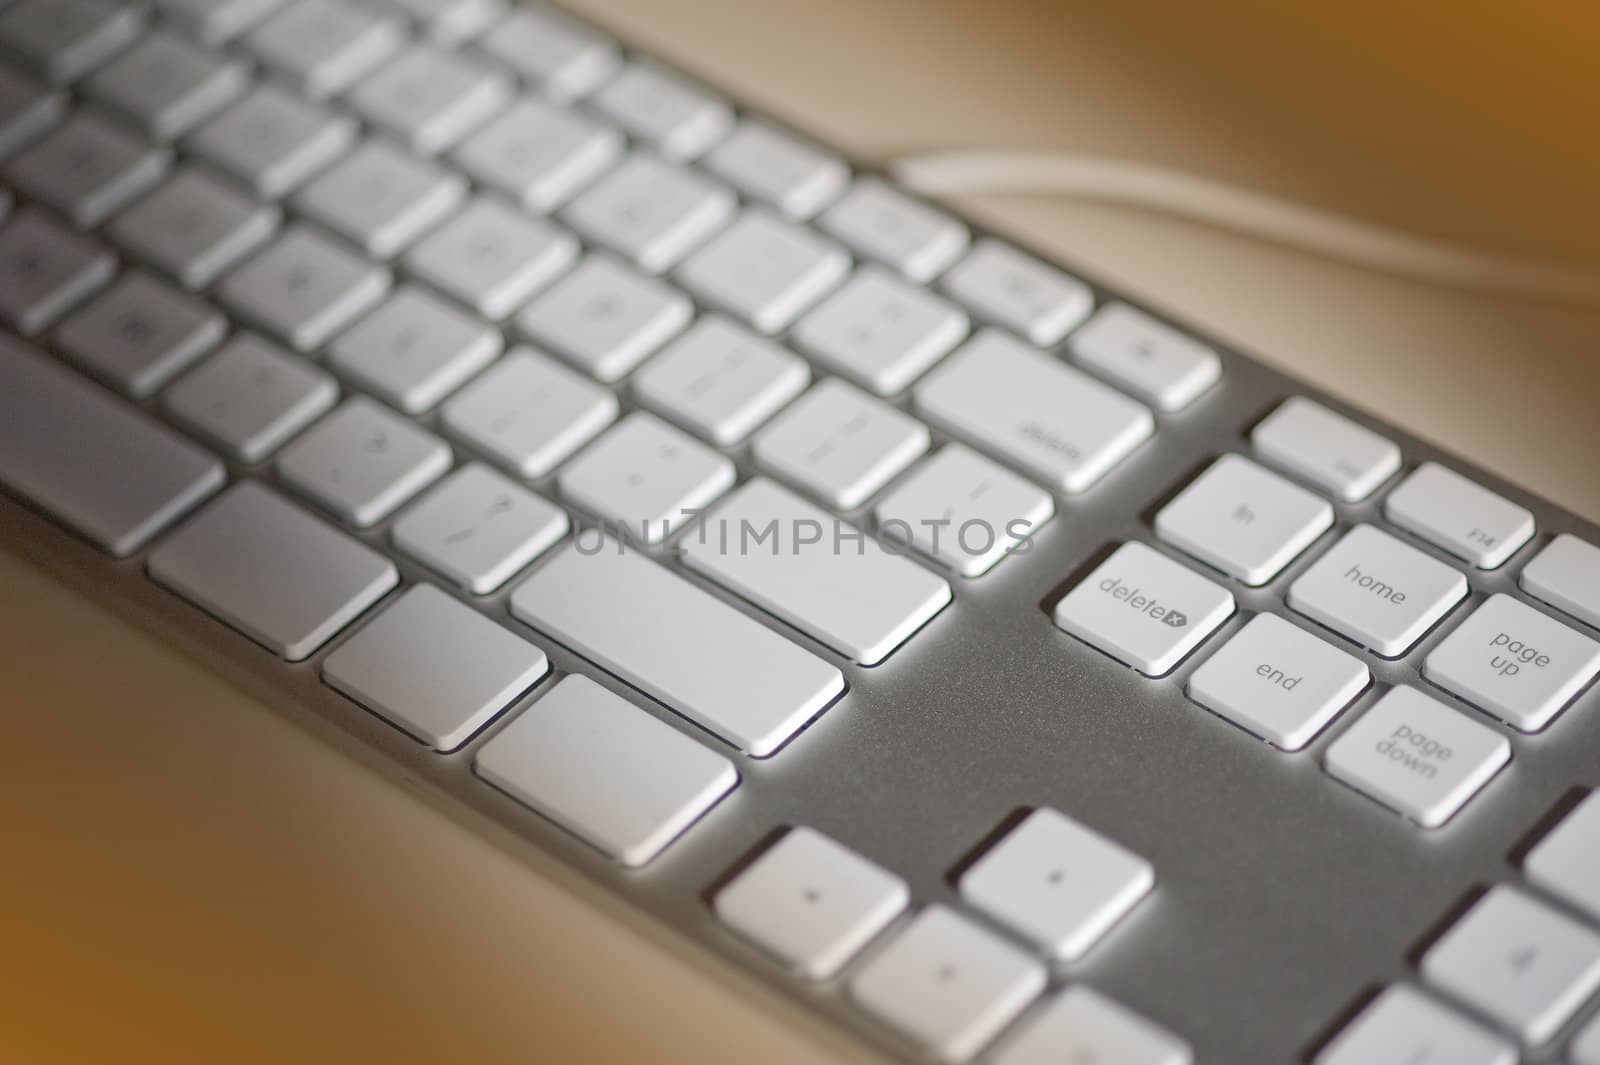 Keyboard in browns by f/2sumicron